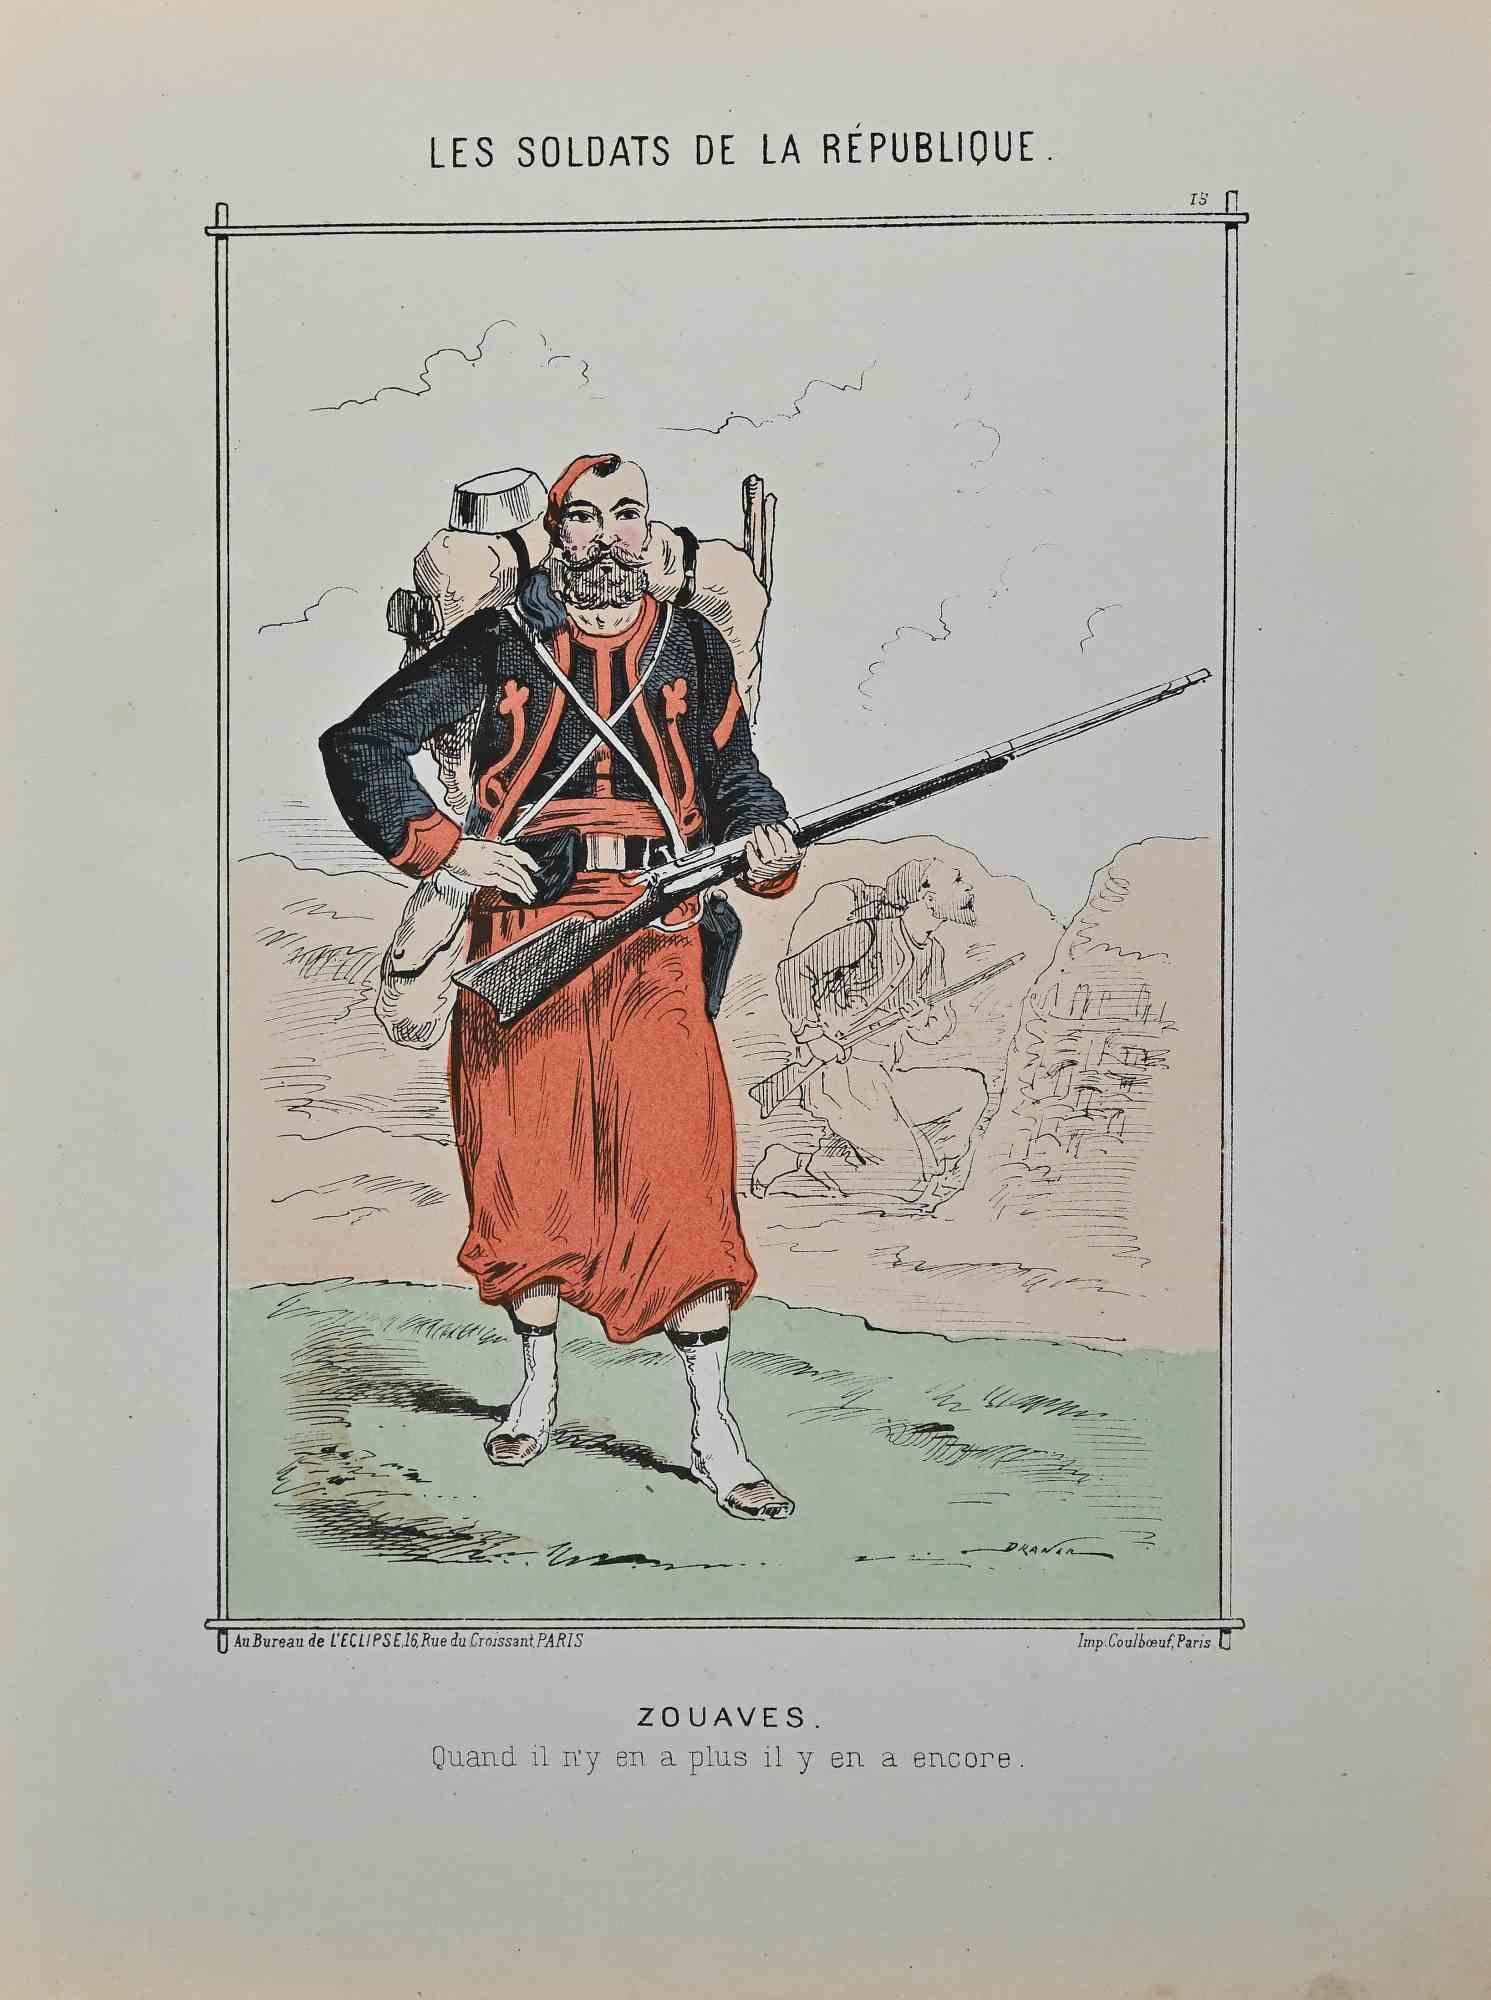 Zouaves - Original Lithograph By Jules Renard - 19th Century